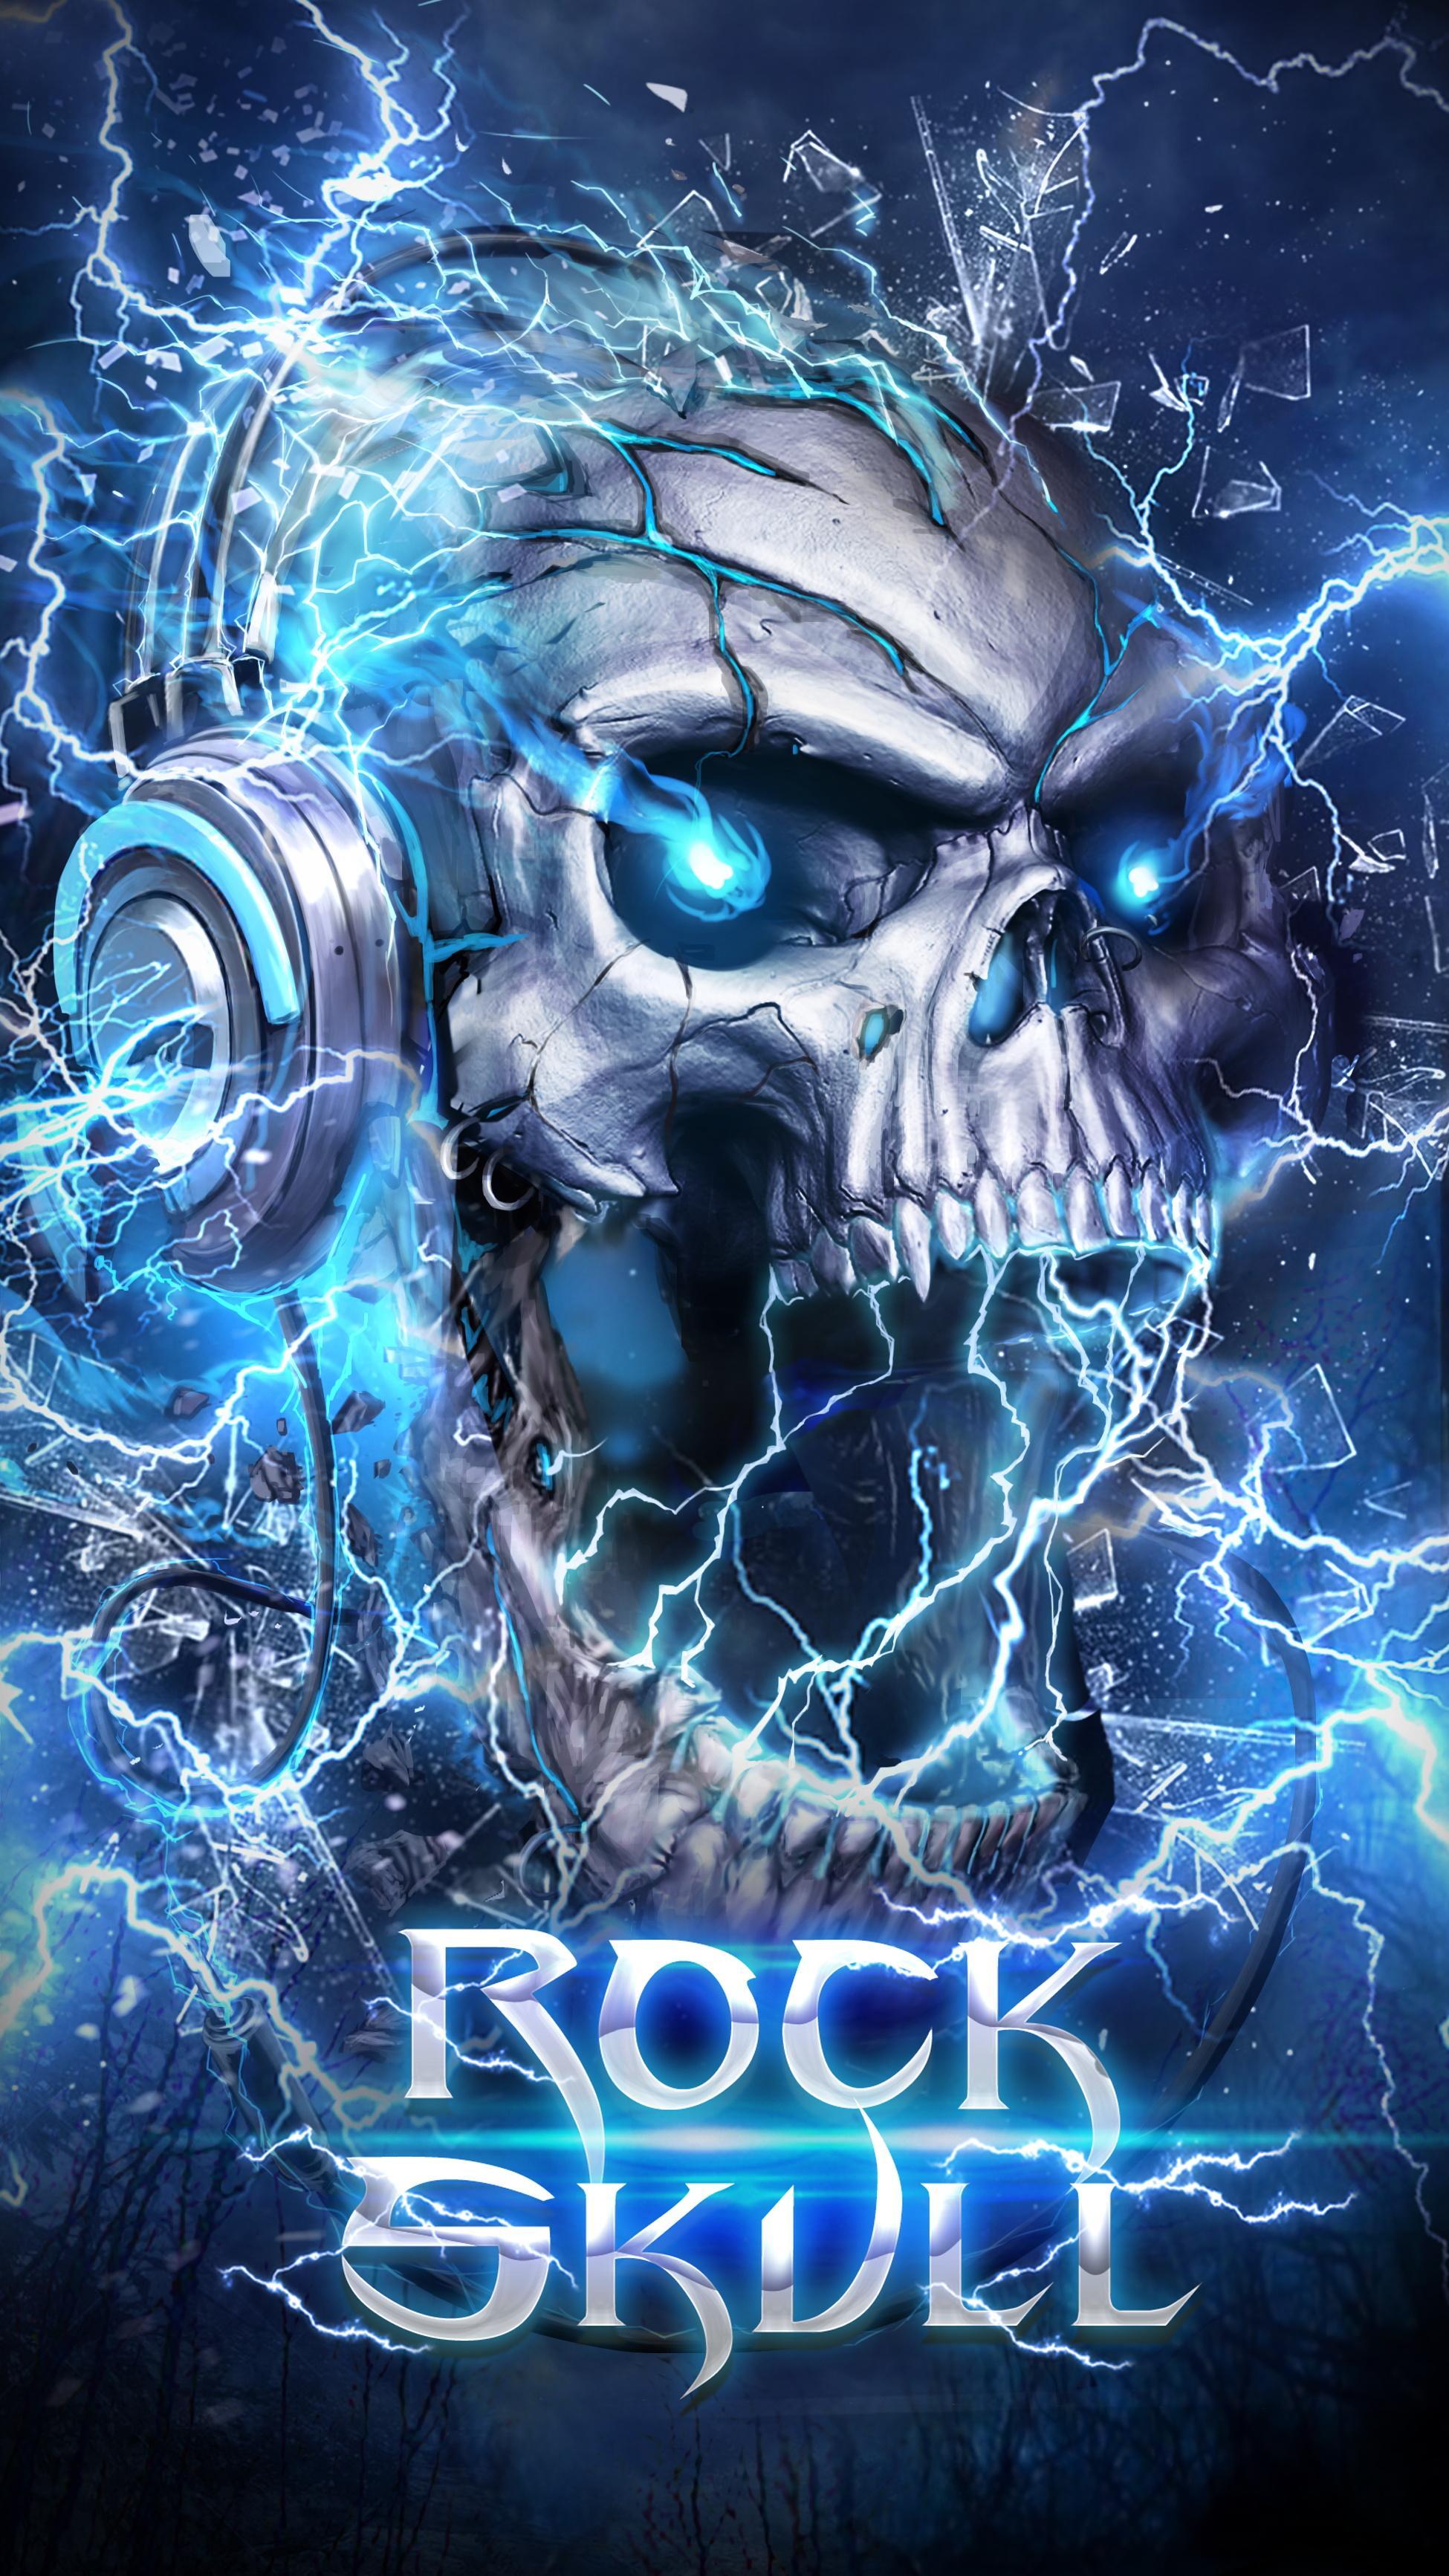 Electric Skull  Live Wallpaper  for Android  APK Download